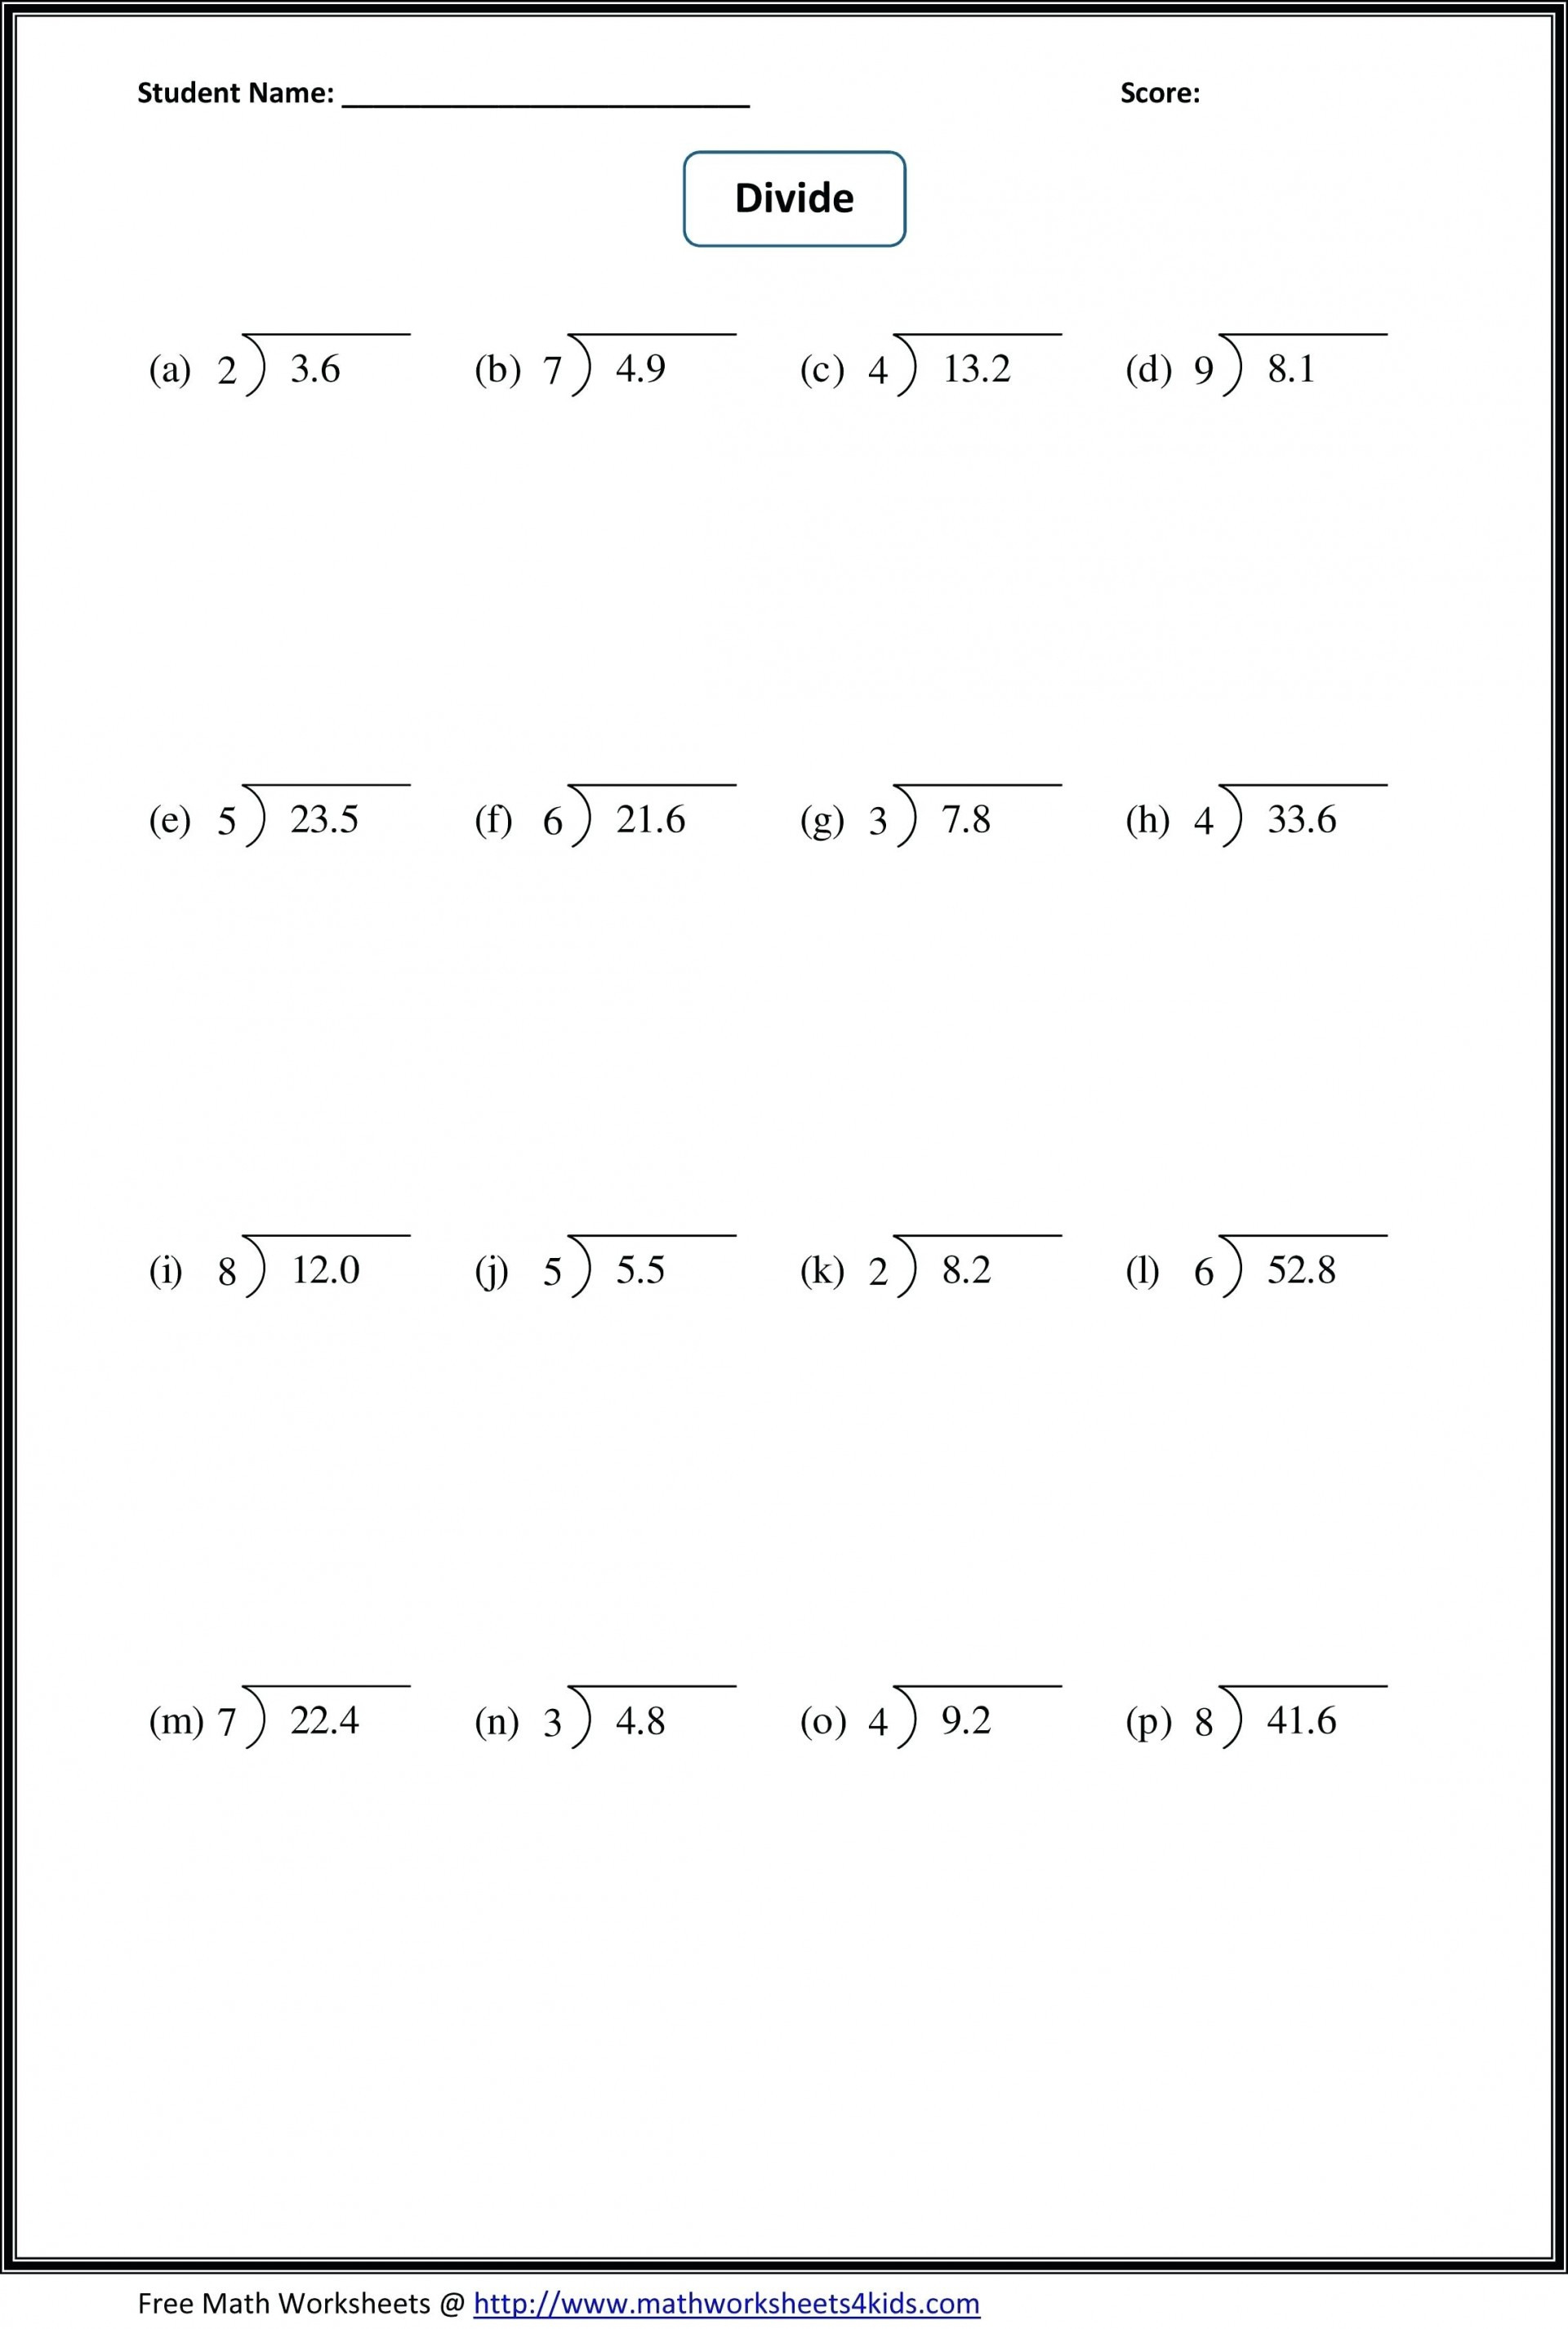 dividing-decimals-by-whole-numbers